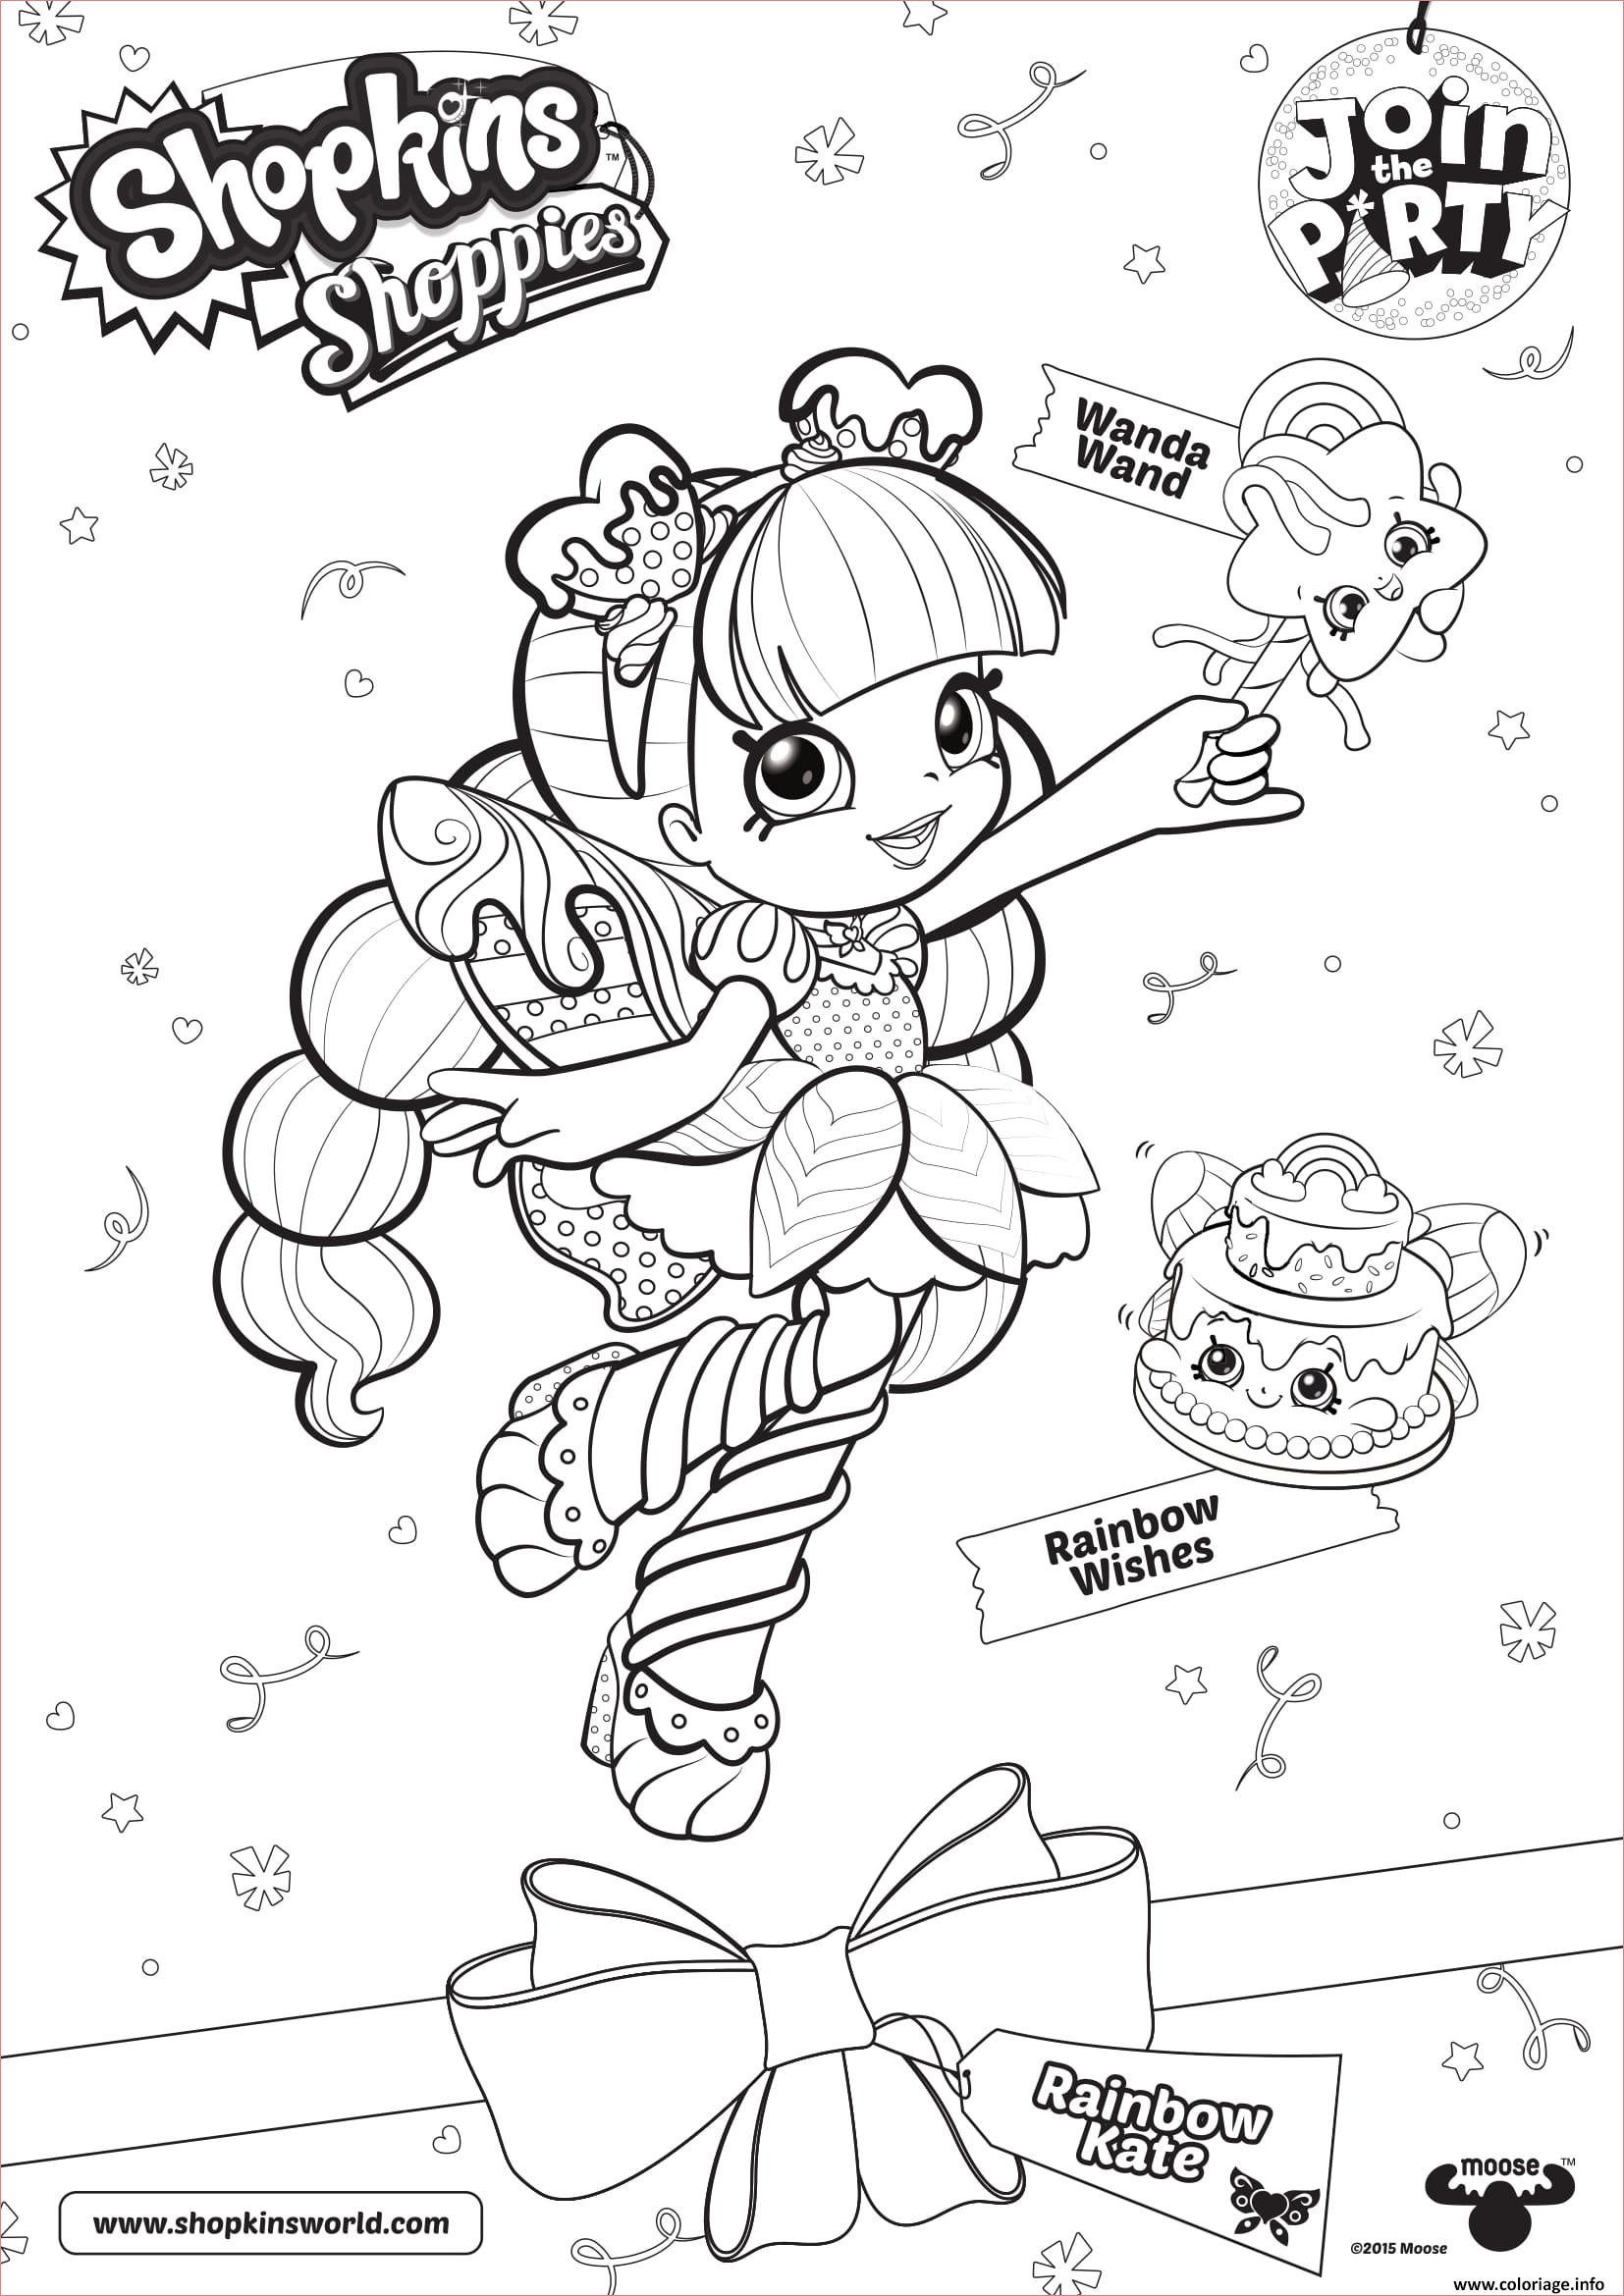 shopkins shoppies join the party wanda wand rainbow wishes coloriage